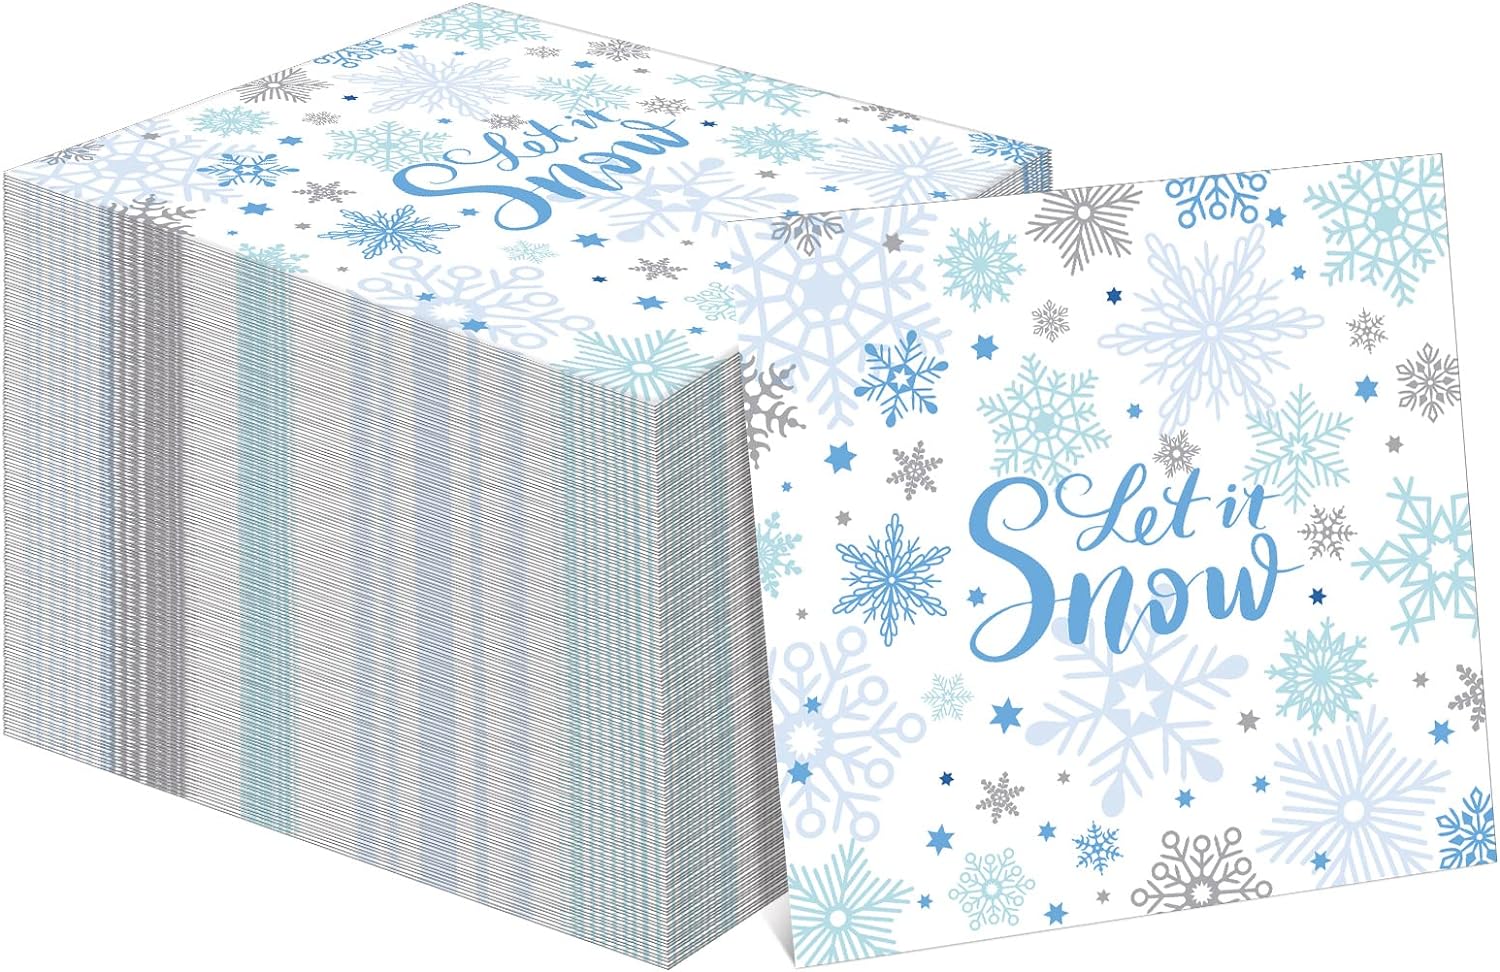 100 Pcs Winter Paper Napkins 6.5 x 6.5 Inch Snowflake Cocktail Napkins Christmas Napkins Party Beverage Napkins 2 Ply Disposable Napkins for Christmas New Year Winter Holiday Dinner Party Supplies